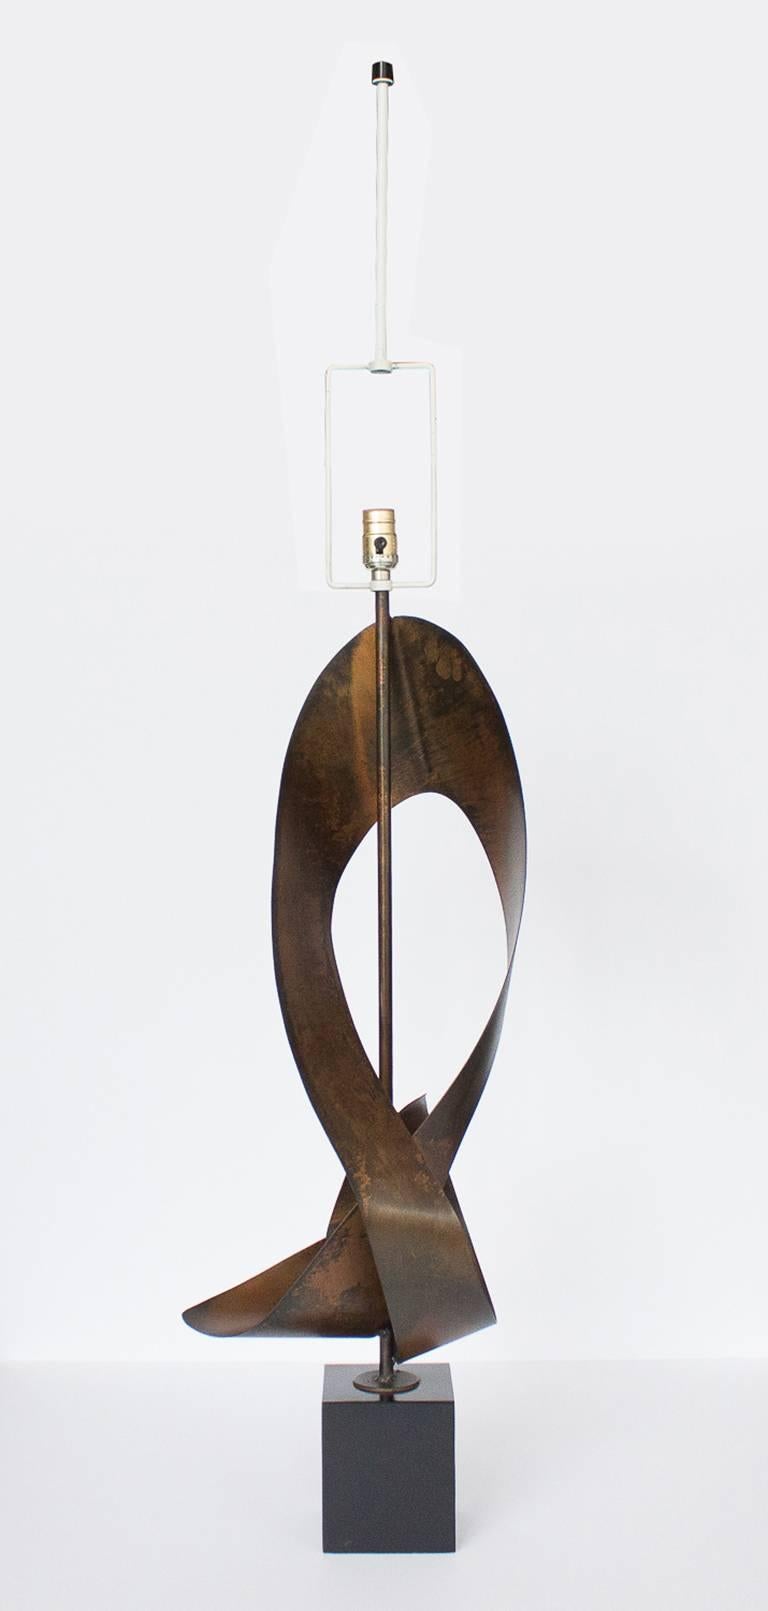 Modern and sculptural table lamp, produced circa 1960s by Brutalist artist Harry Balmer for Laurel Lamp Company. The lamp features a bronze / copper tone patinated steel sheet, reformed and soldered into a curved, abstracted ribbon shape,